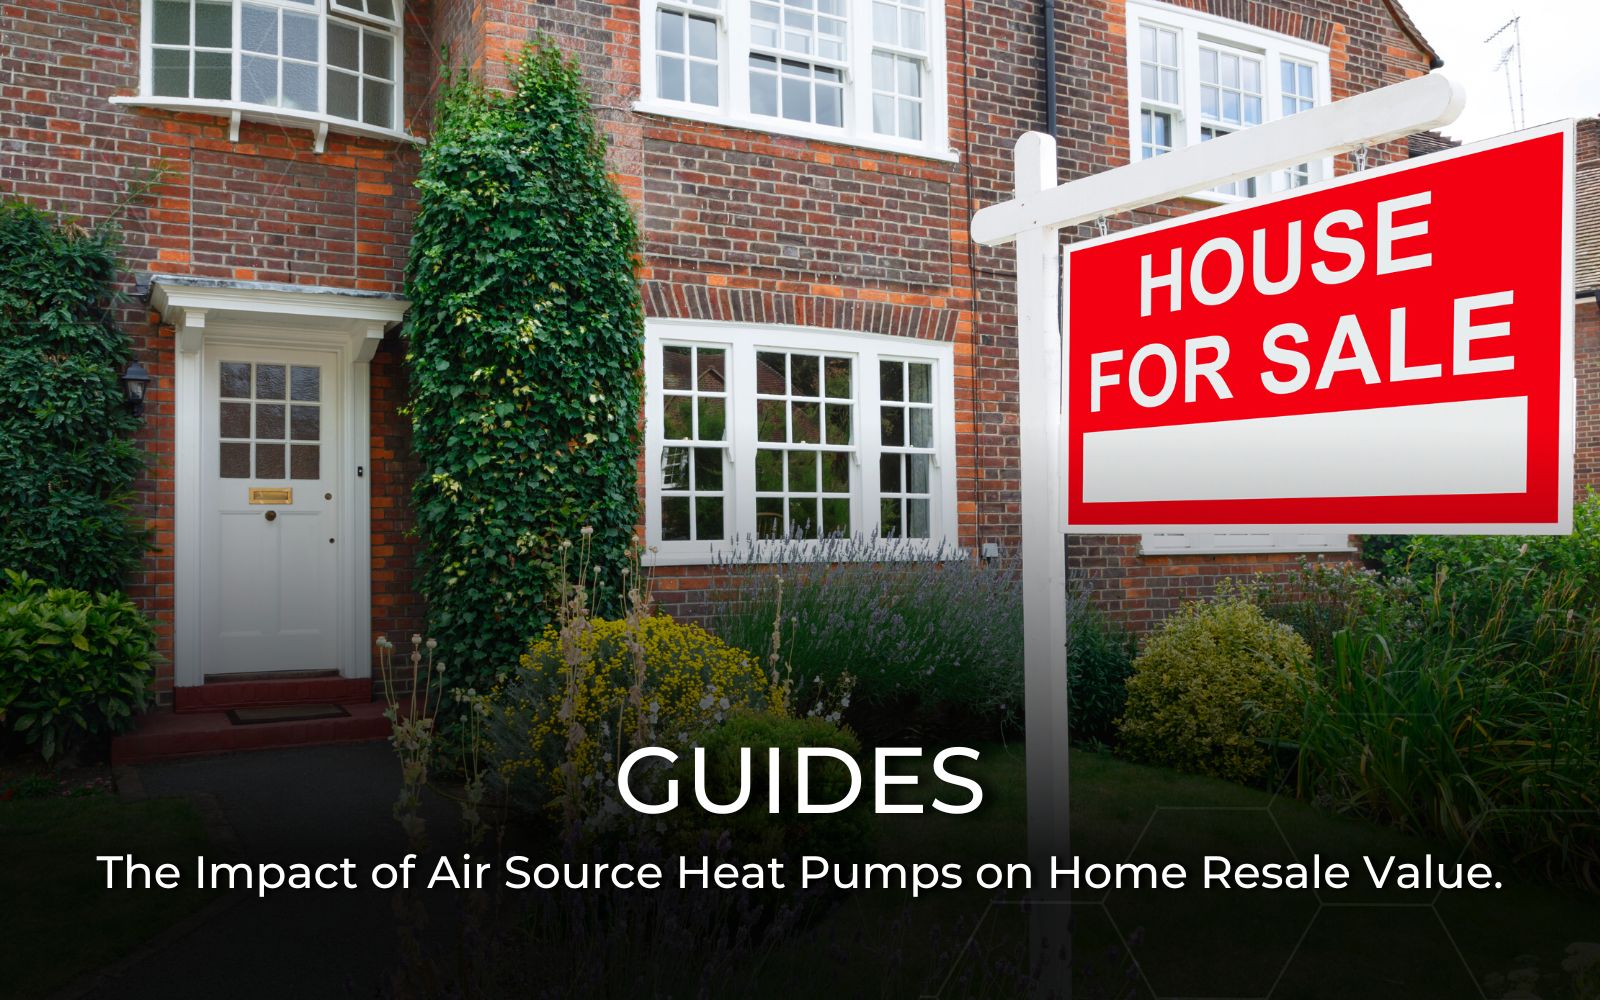 The impact of air source heat pumps on home resale value